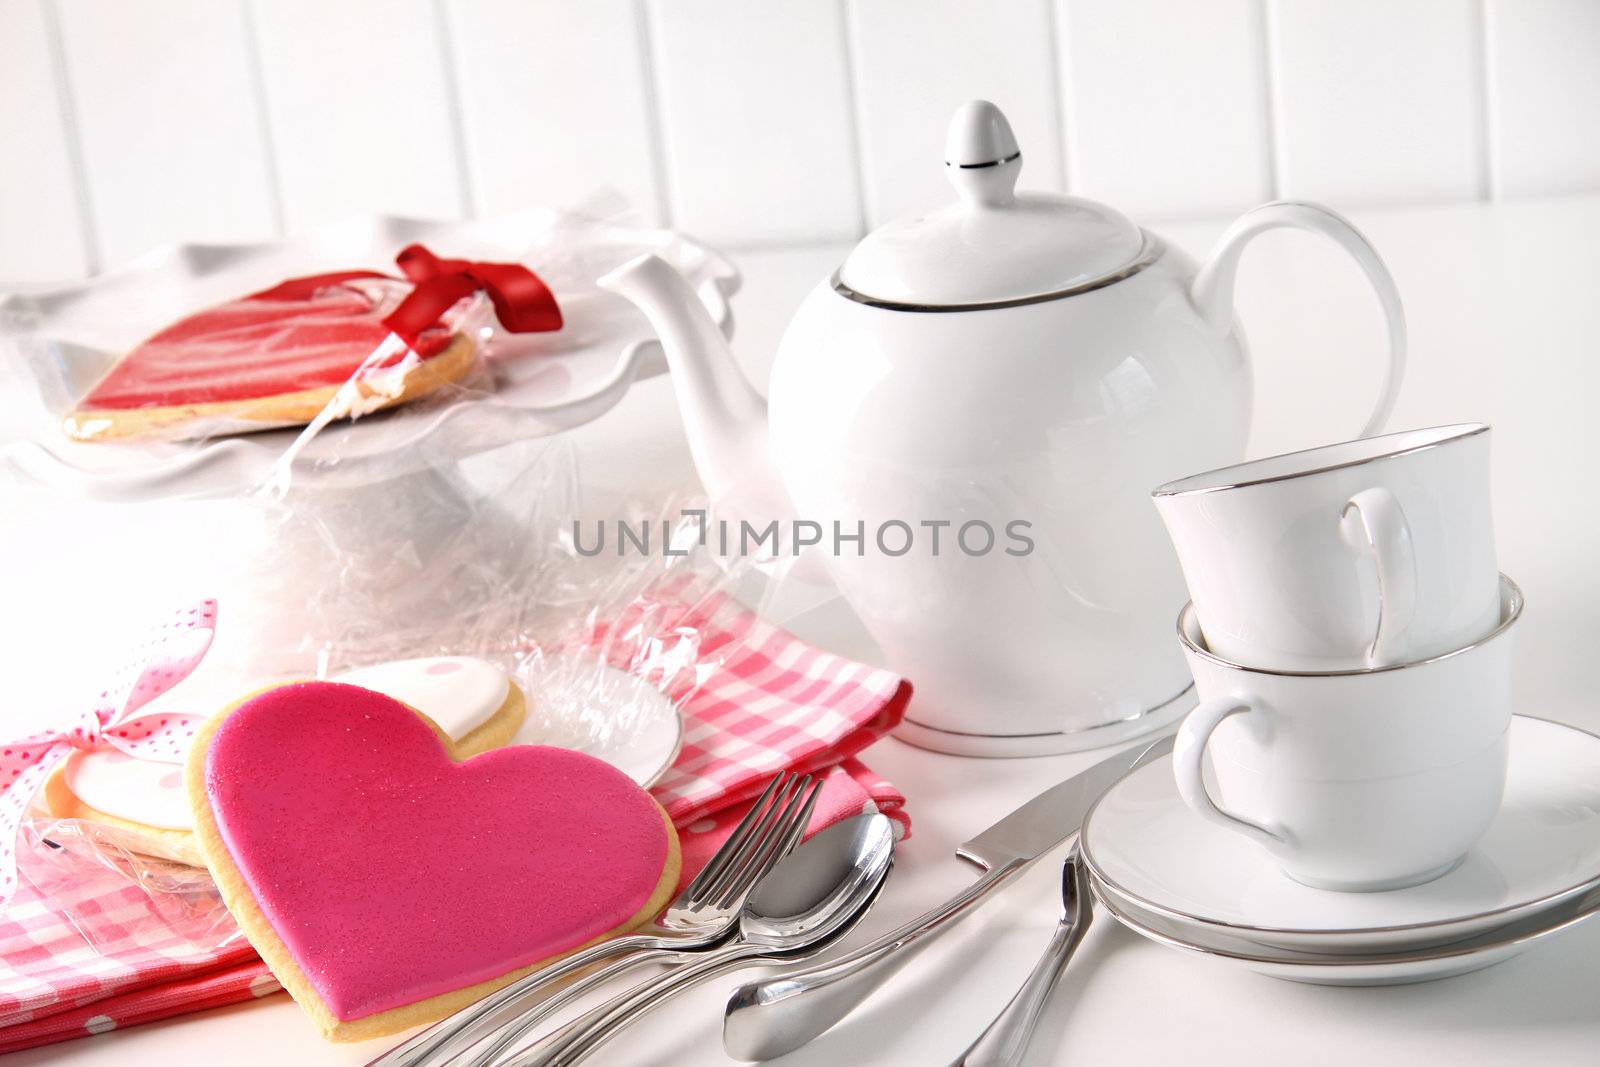 Valentine cookies with teapot and cups on kitchen counter